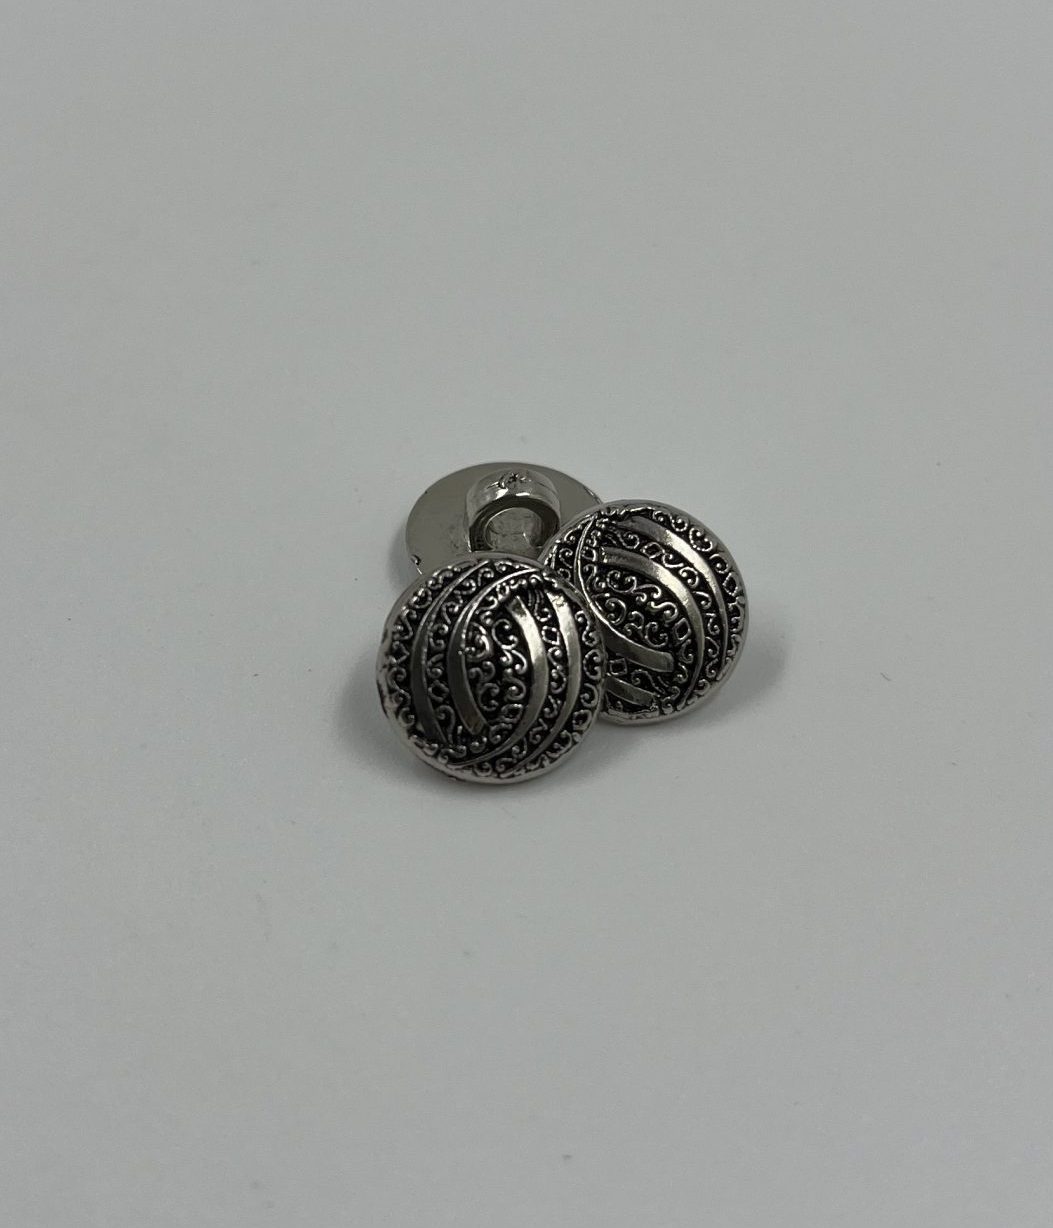 Metal effect button with intricate lattice motif